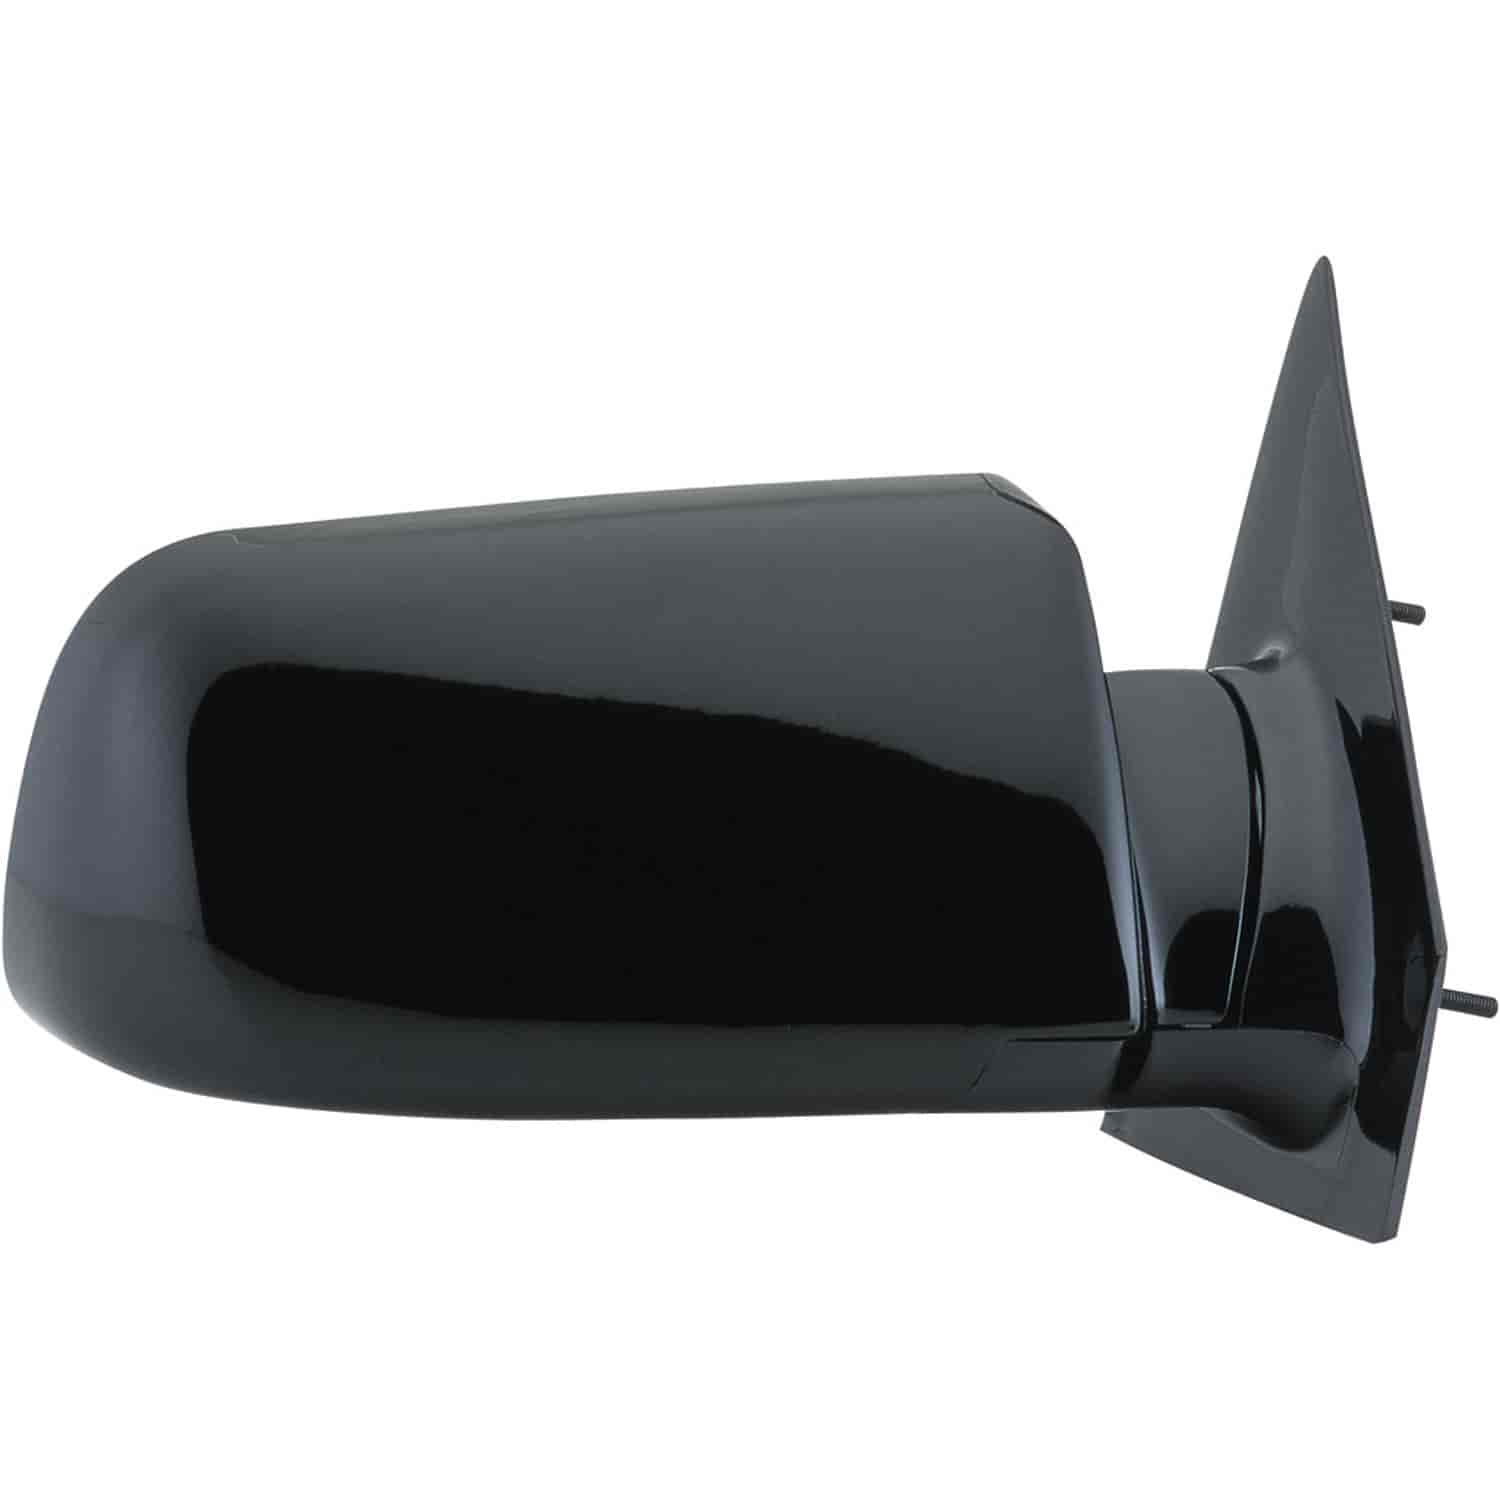 OEM Style Replacement mirror for 88-05 Chevy Astro Van GMC Safari Van passenger side mirror tested t